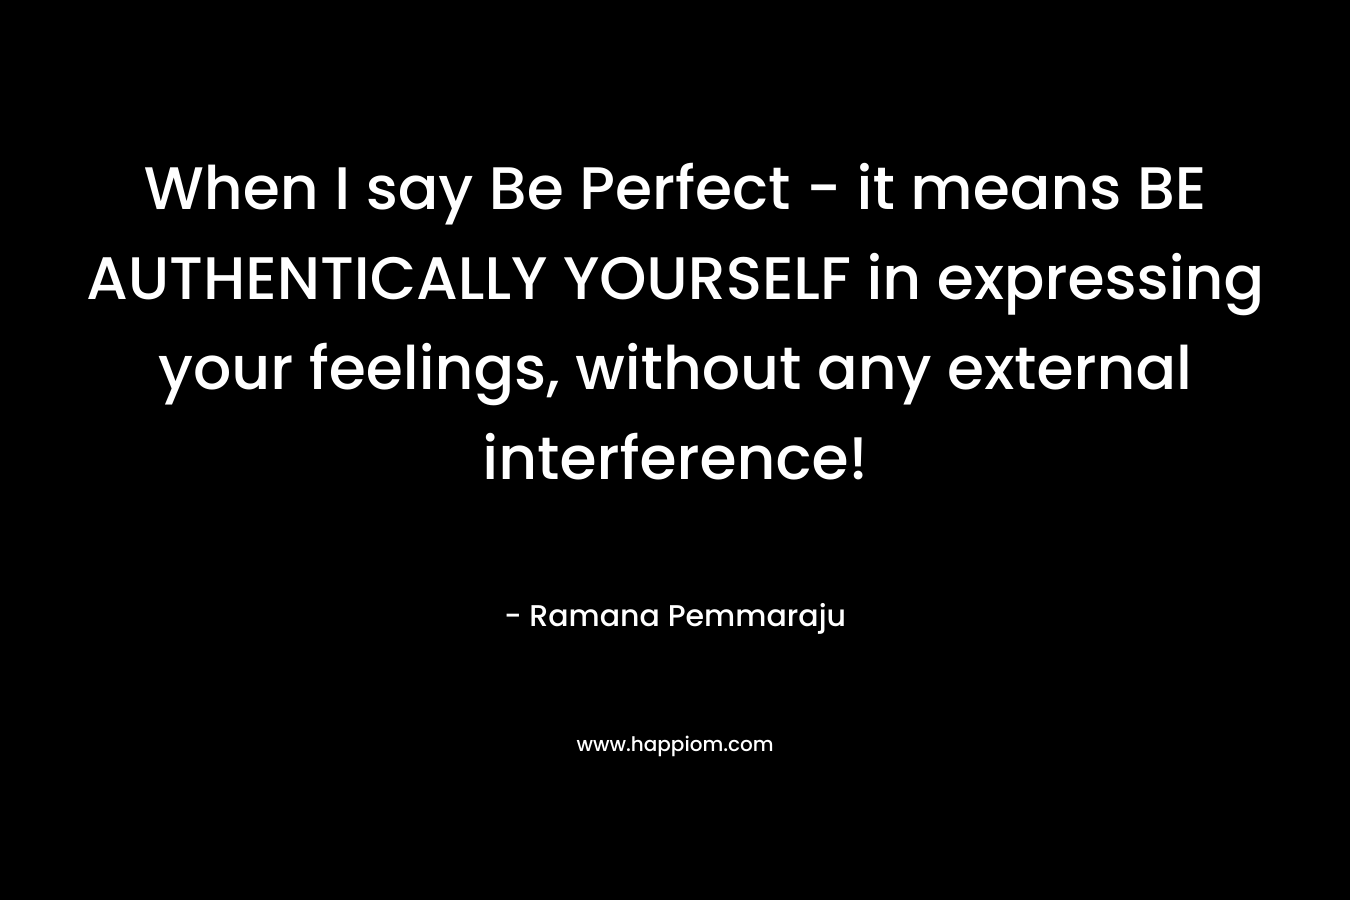 When I say Be Perfect – it means BE AUTHENTICALLY YOURSELF in expressing your feelings, without any external interference! – Ramana Pemmaraju